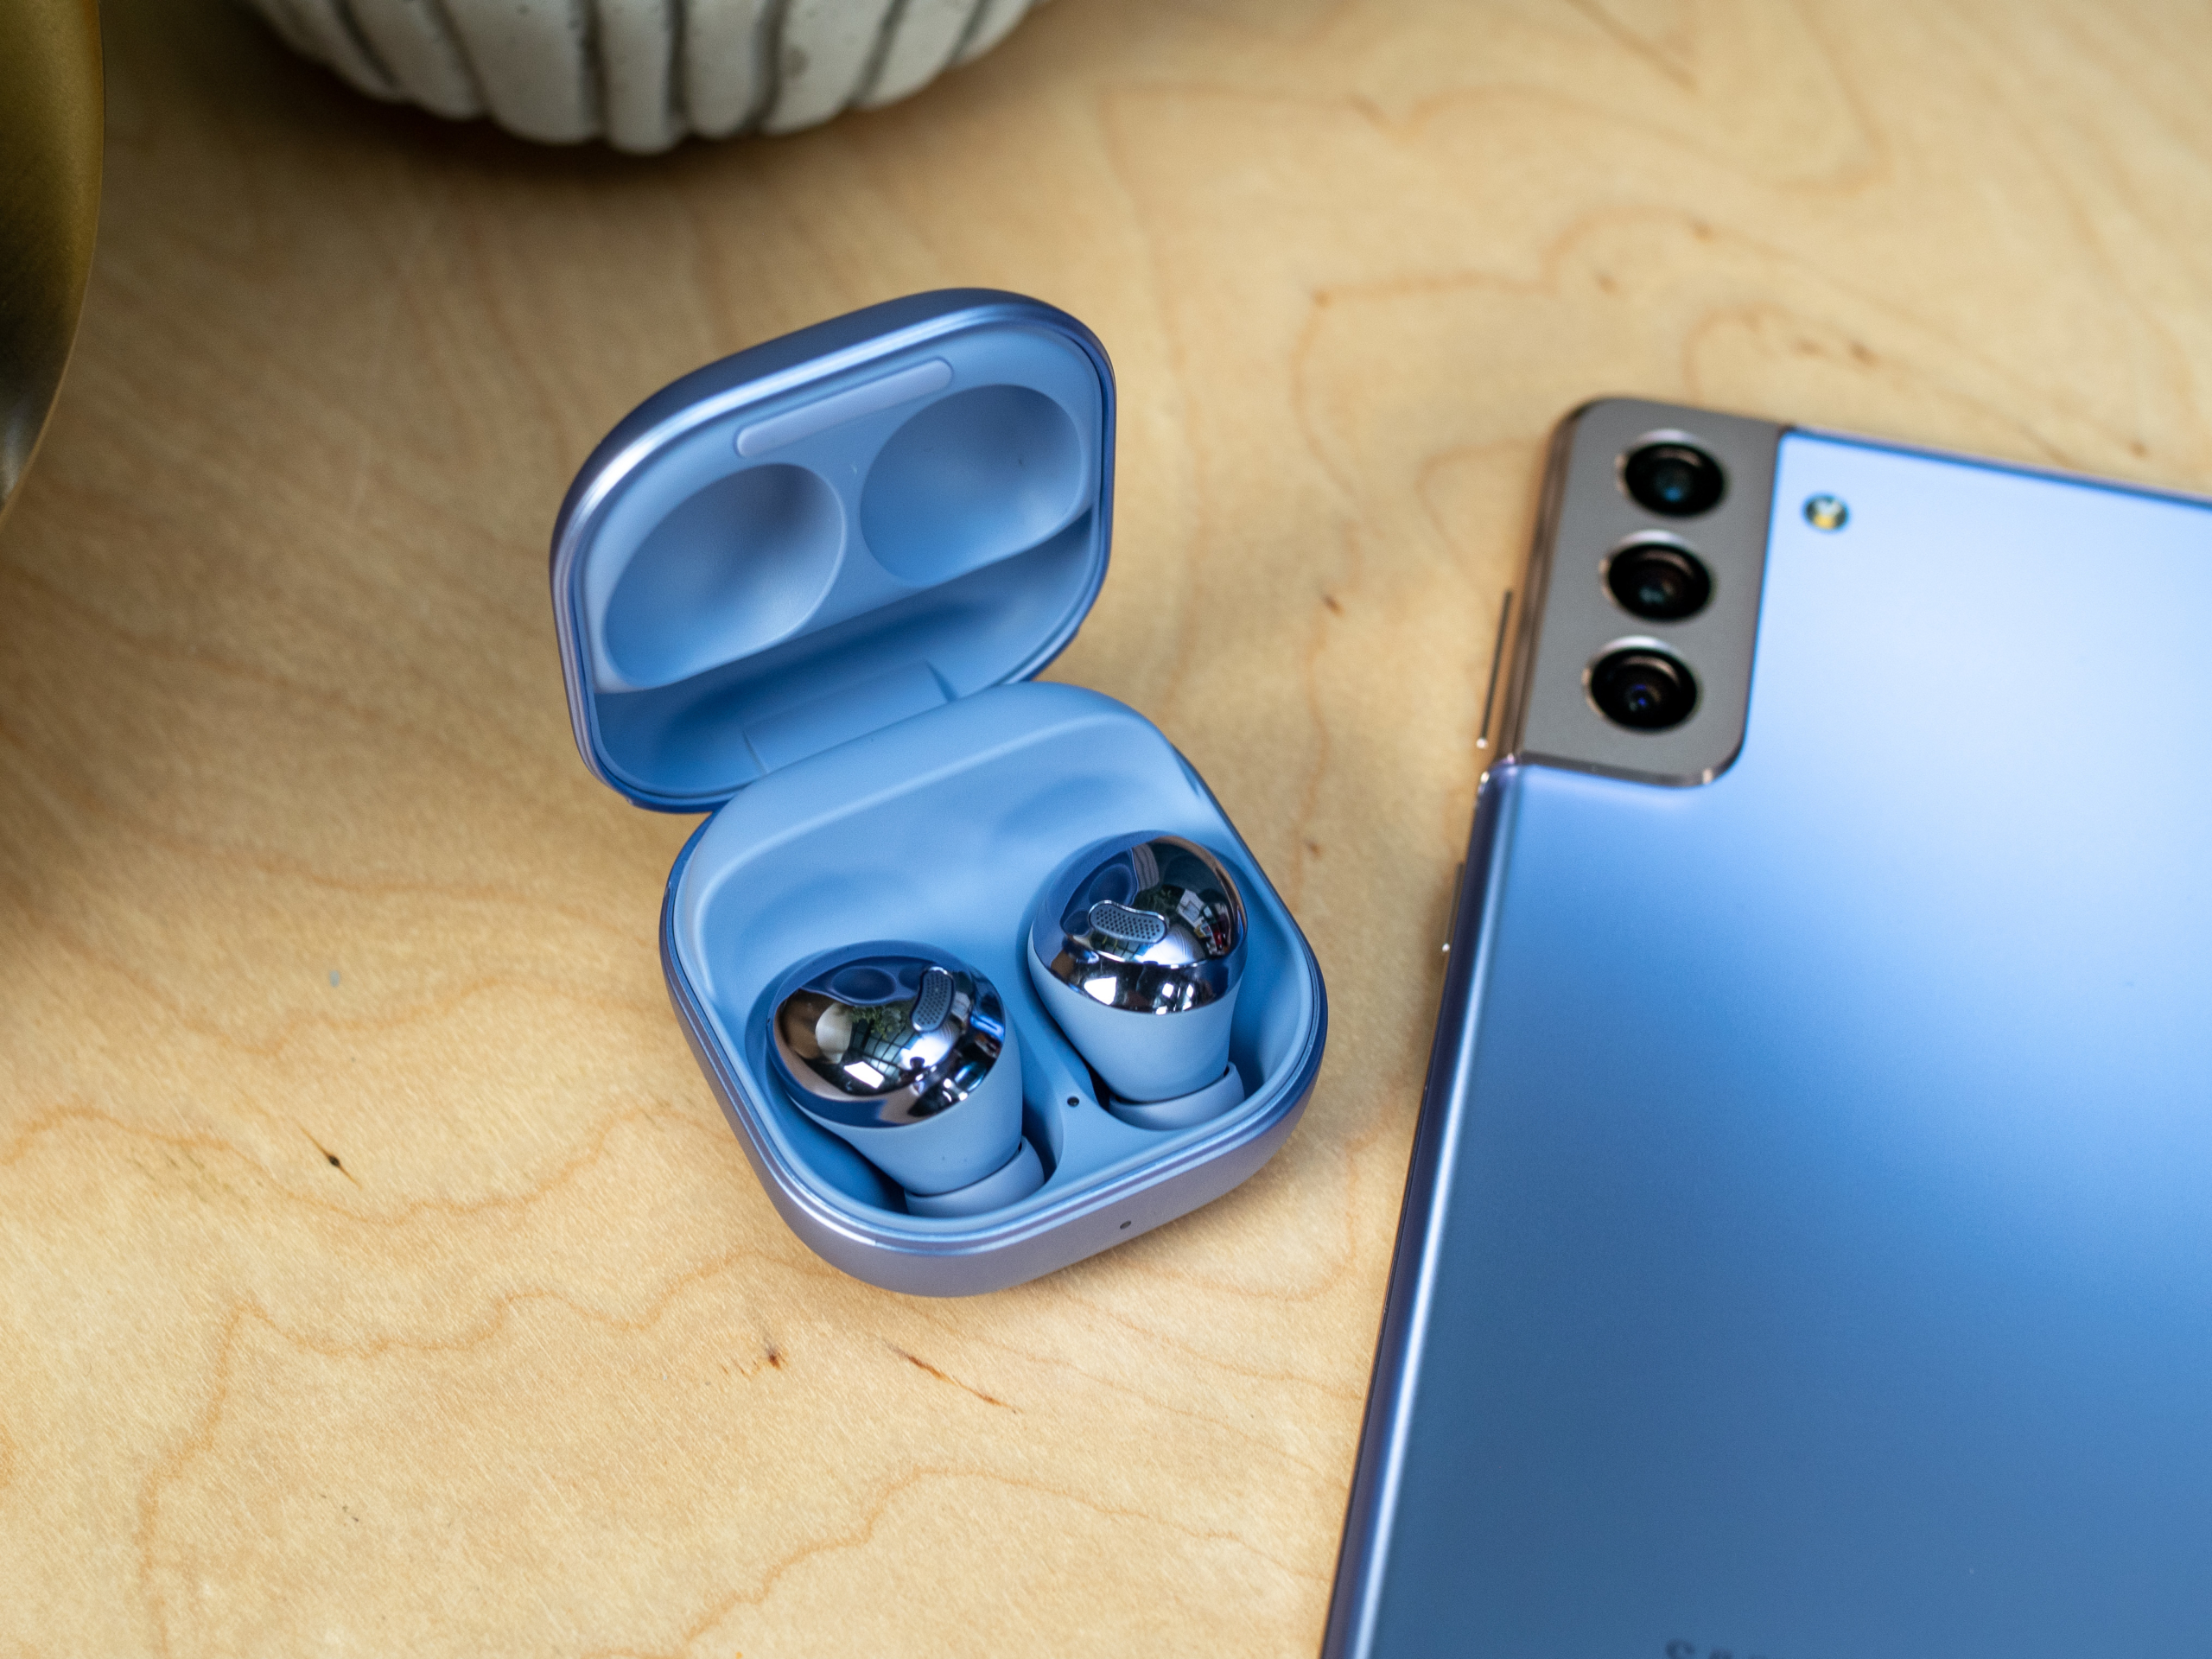 Samsung Galaxy Buds Pro Review: Sound, Battery, Features Digital Trends